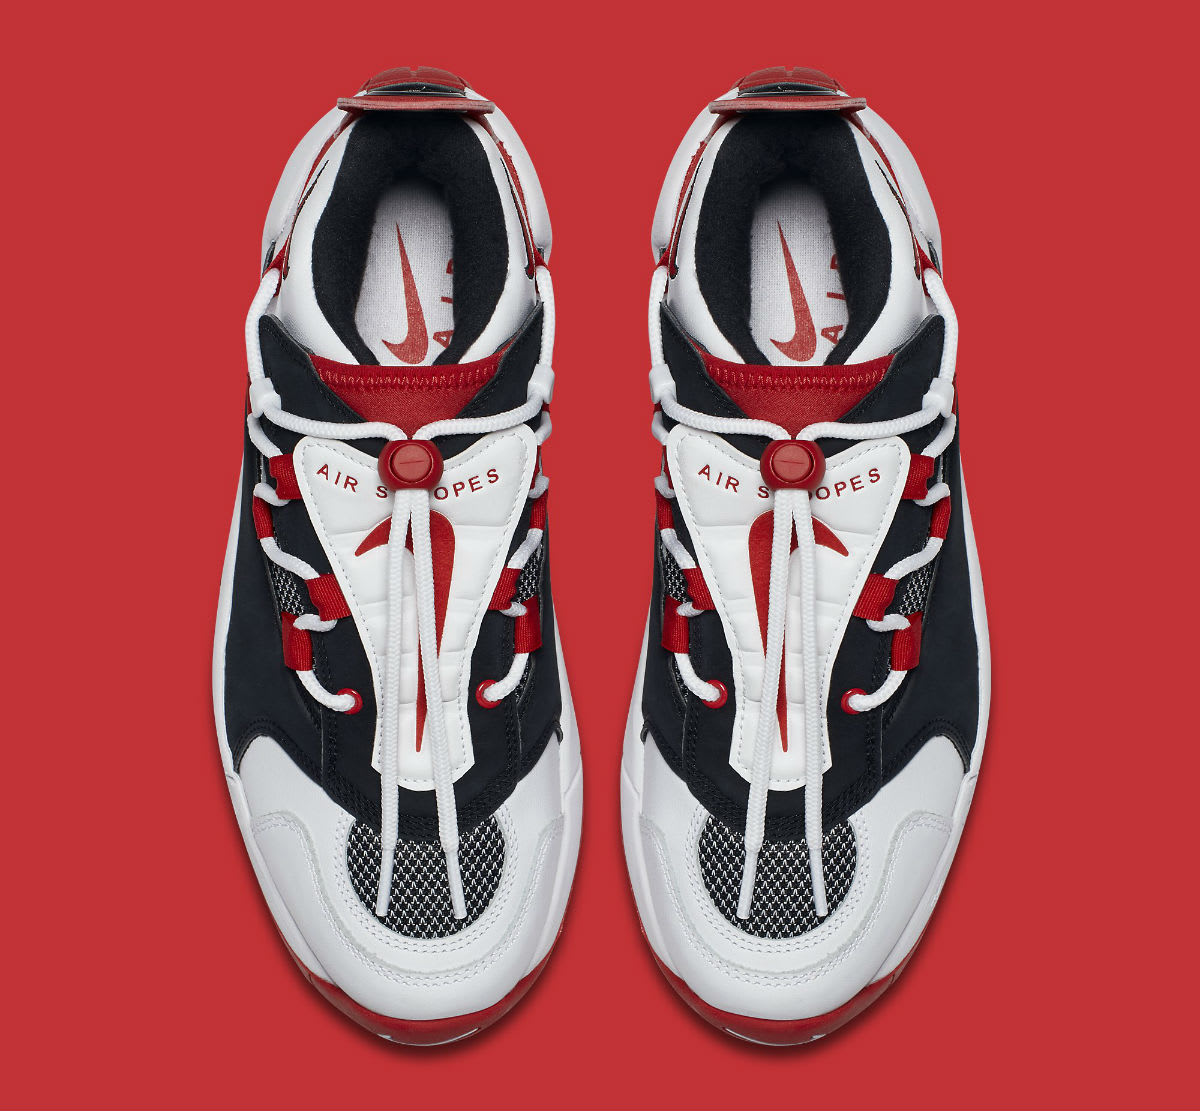 Nike Air Swoopes 2 II White Red Release Date 917592-100 Top